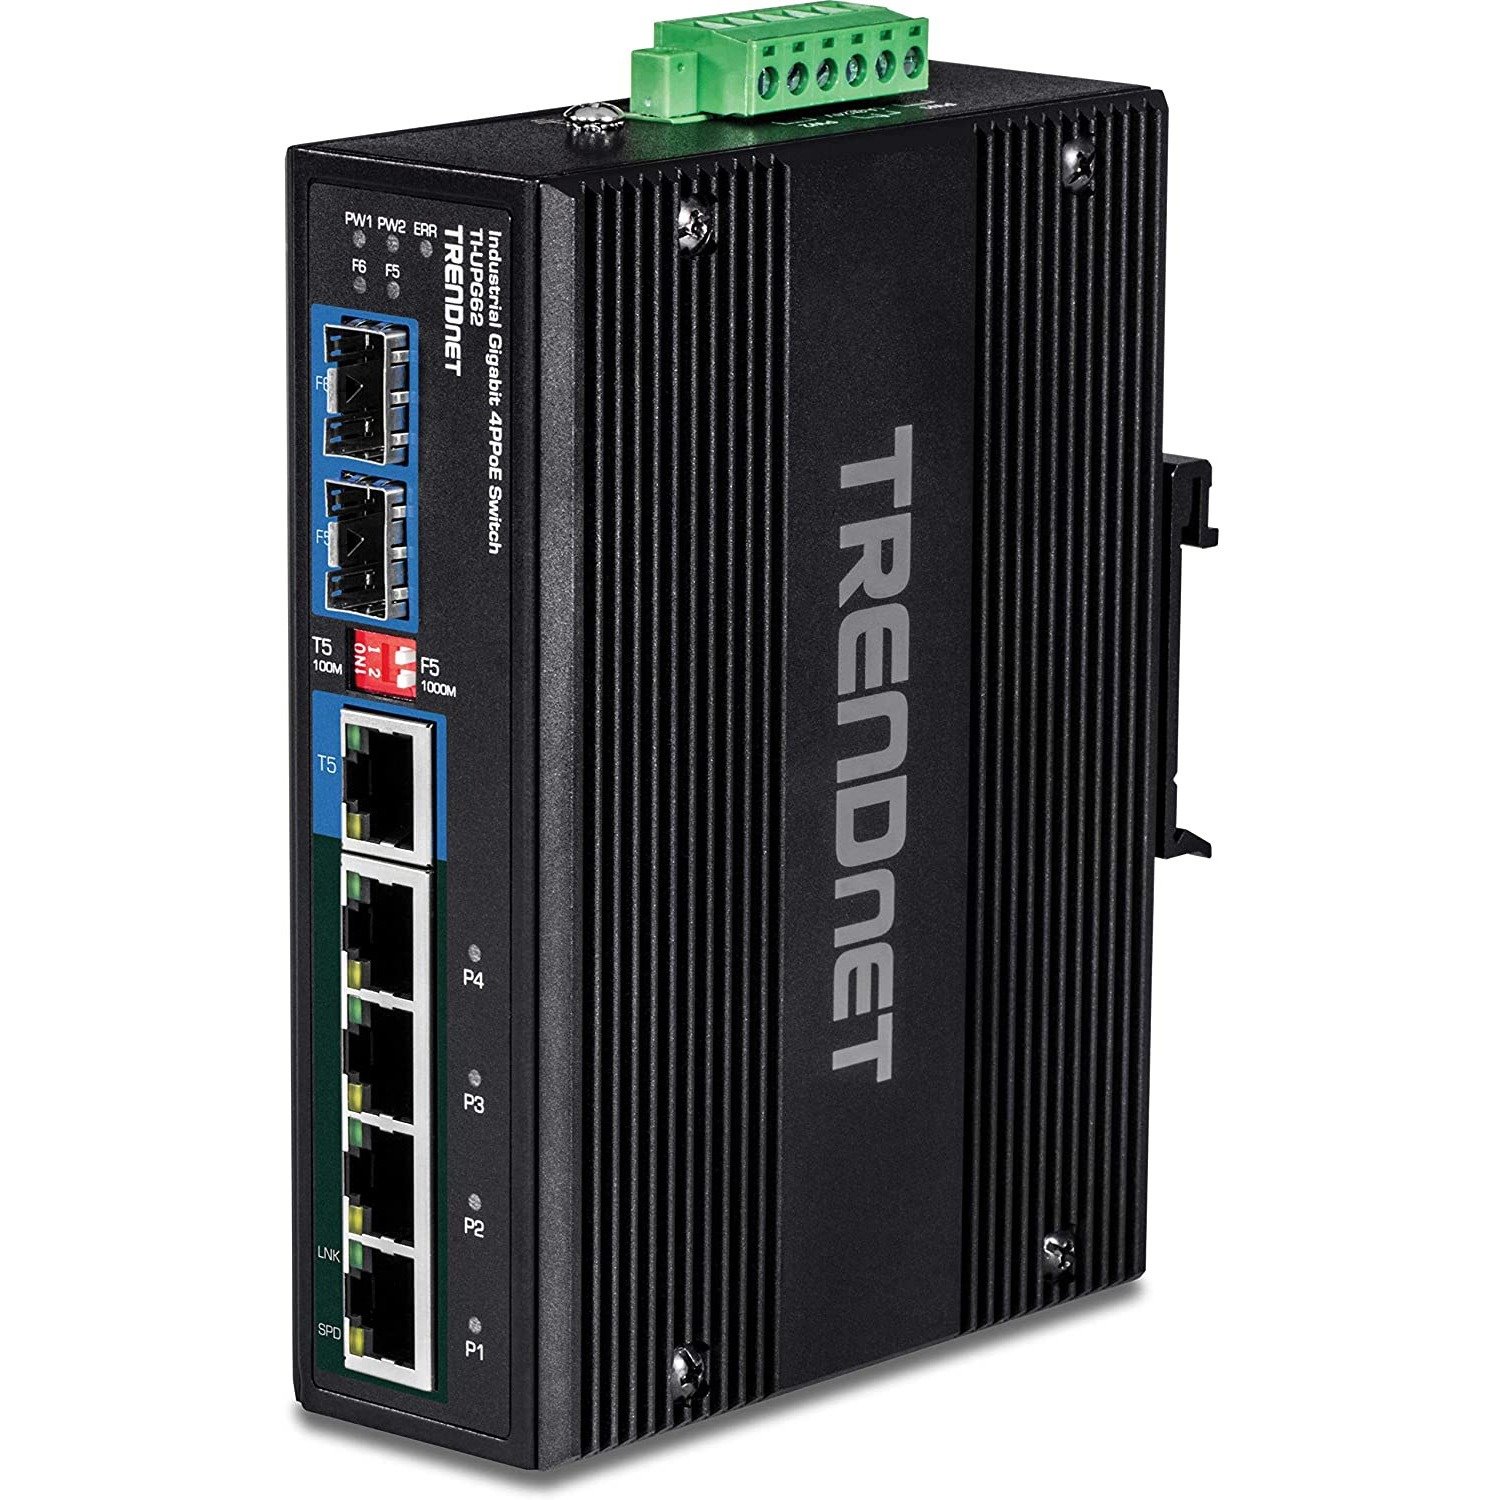 TRENDnet 6-Port Hardened Industrial Gigabit 10/100/1000 Mbps Ultra PoE DIN-Rail Switch; UPoE; IP30; DIN-Rail & Wall Mounts Included; Lifetime Protection; TI-UPG62